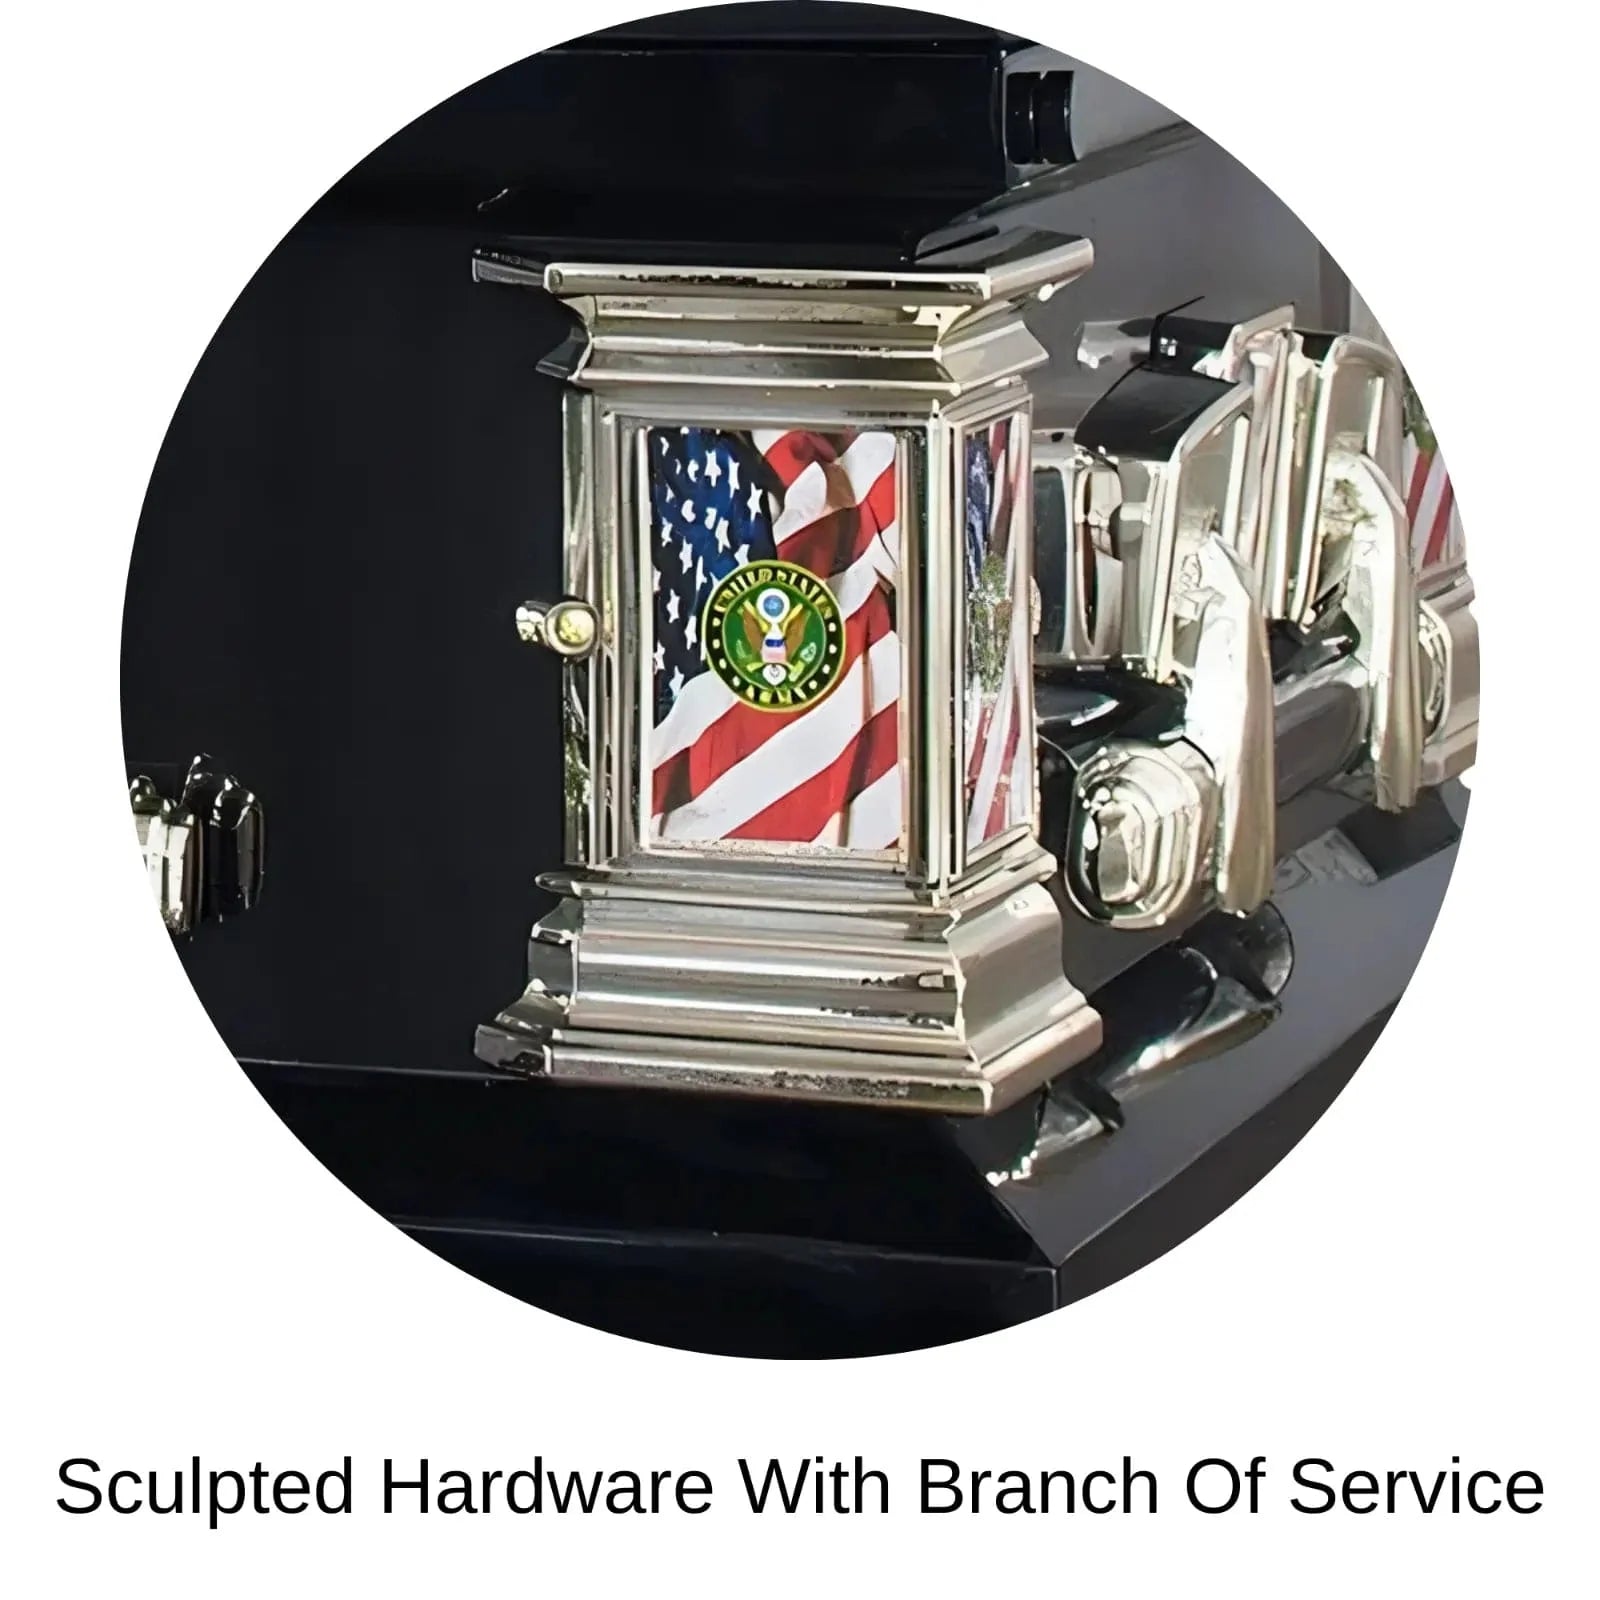 Sculpted Hardware with Branch of Service